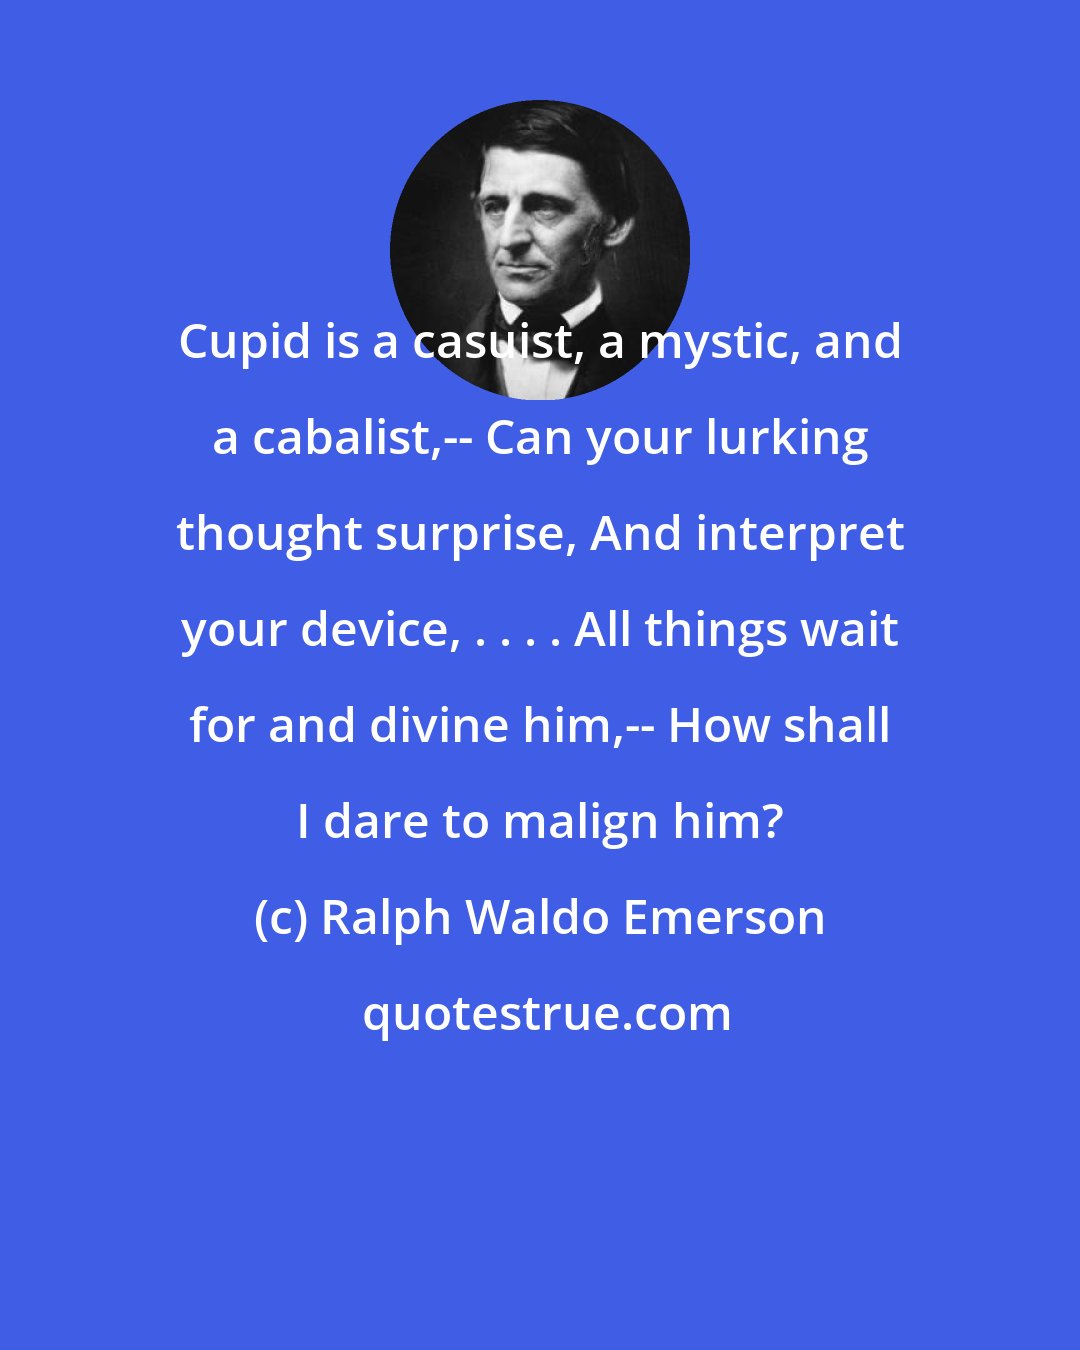 Ralph Waldo Emerson: Cupid is a casuist, a mystic, and a cabalist,-- Can your lurking thought surprise, And interpret your device, . . . . All things wait for and divine him,-- How shall I dare to malign him?